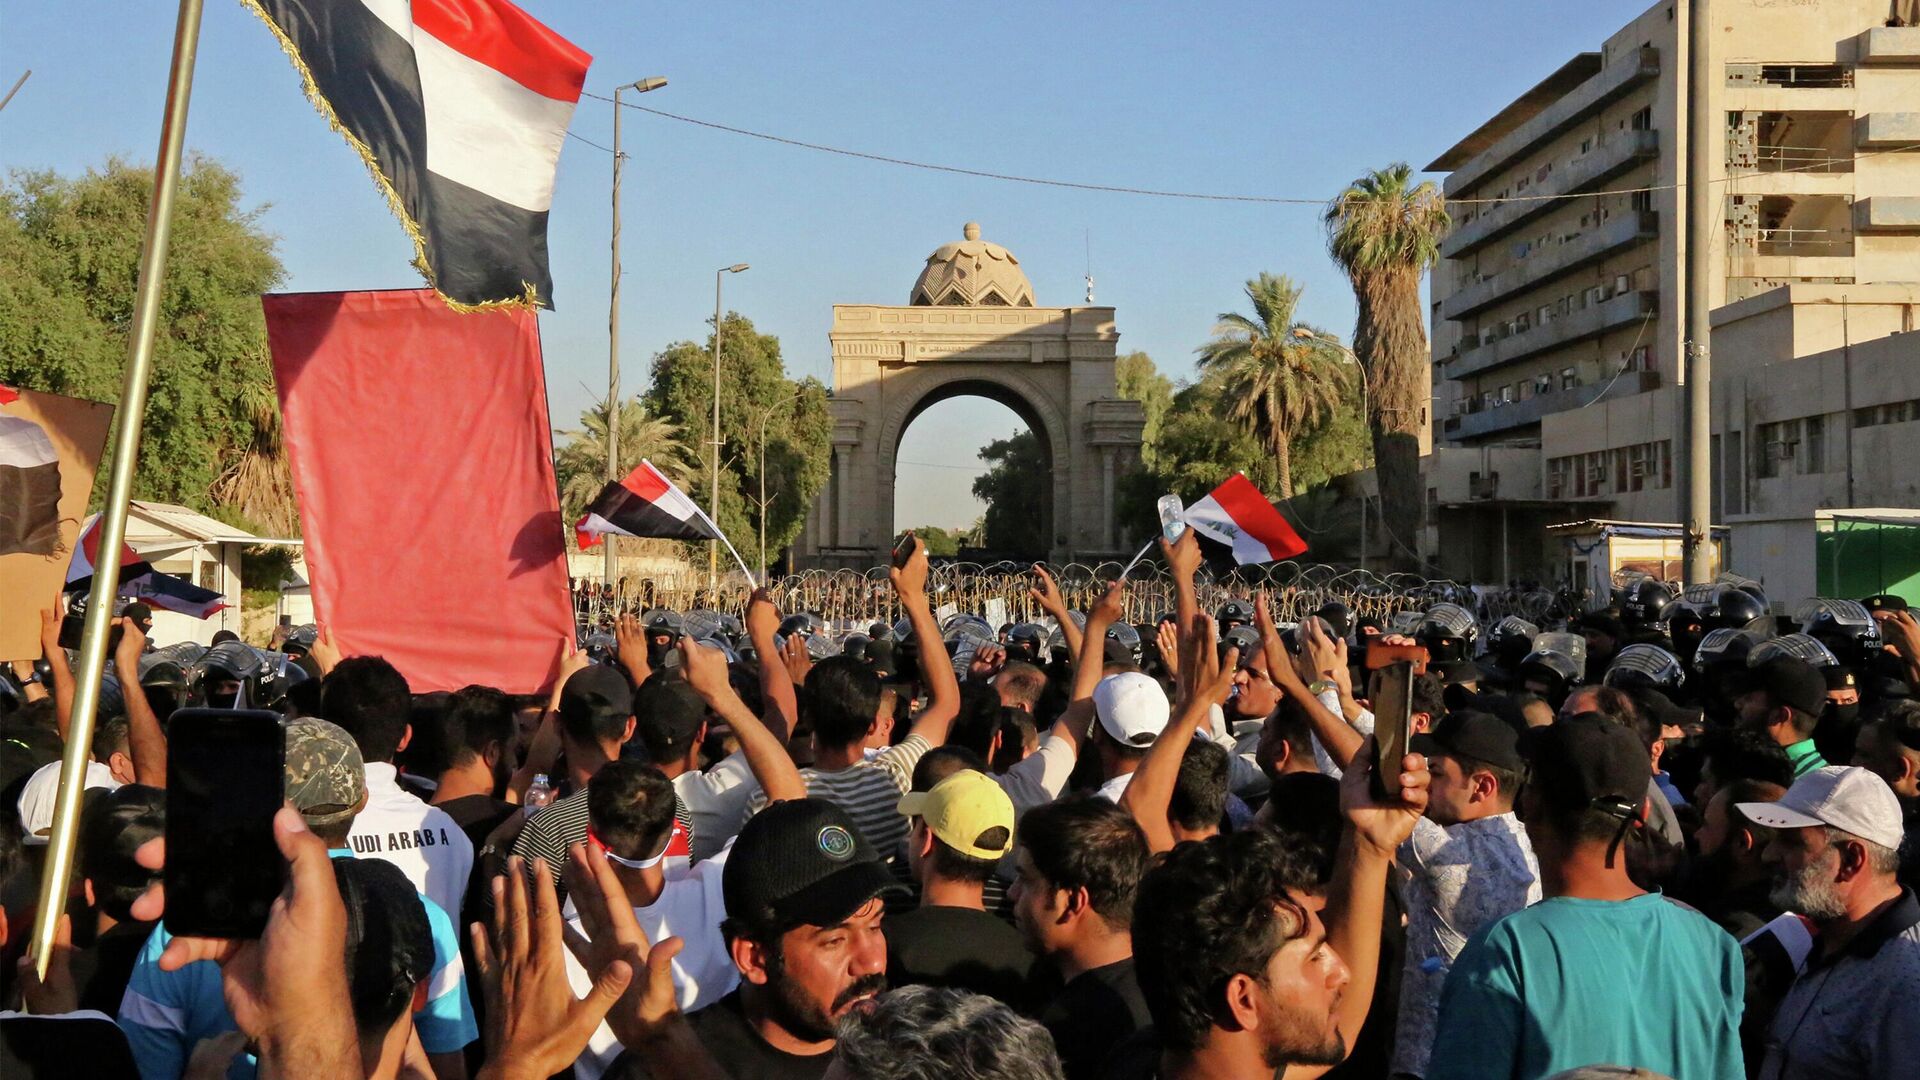 Supporters of Iraqi Shiite cleric Muqtada al-Sadr gather outside the main gate of Baghdad's Green Zone on July 27, 2022 to protest against the nomination of Mohammed Shia al-Sudani for the prime minister position. - اسپوتنیک افغانستان  , 1920, 27.07.2022